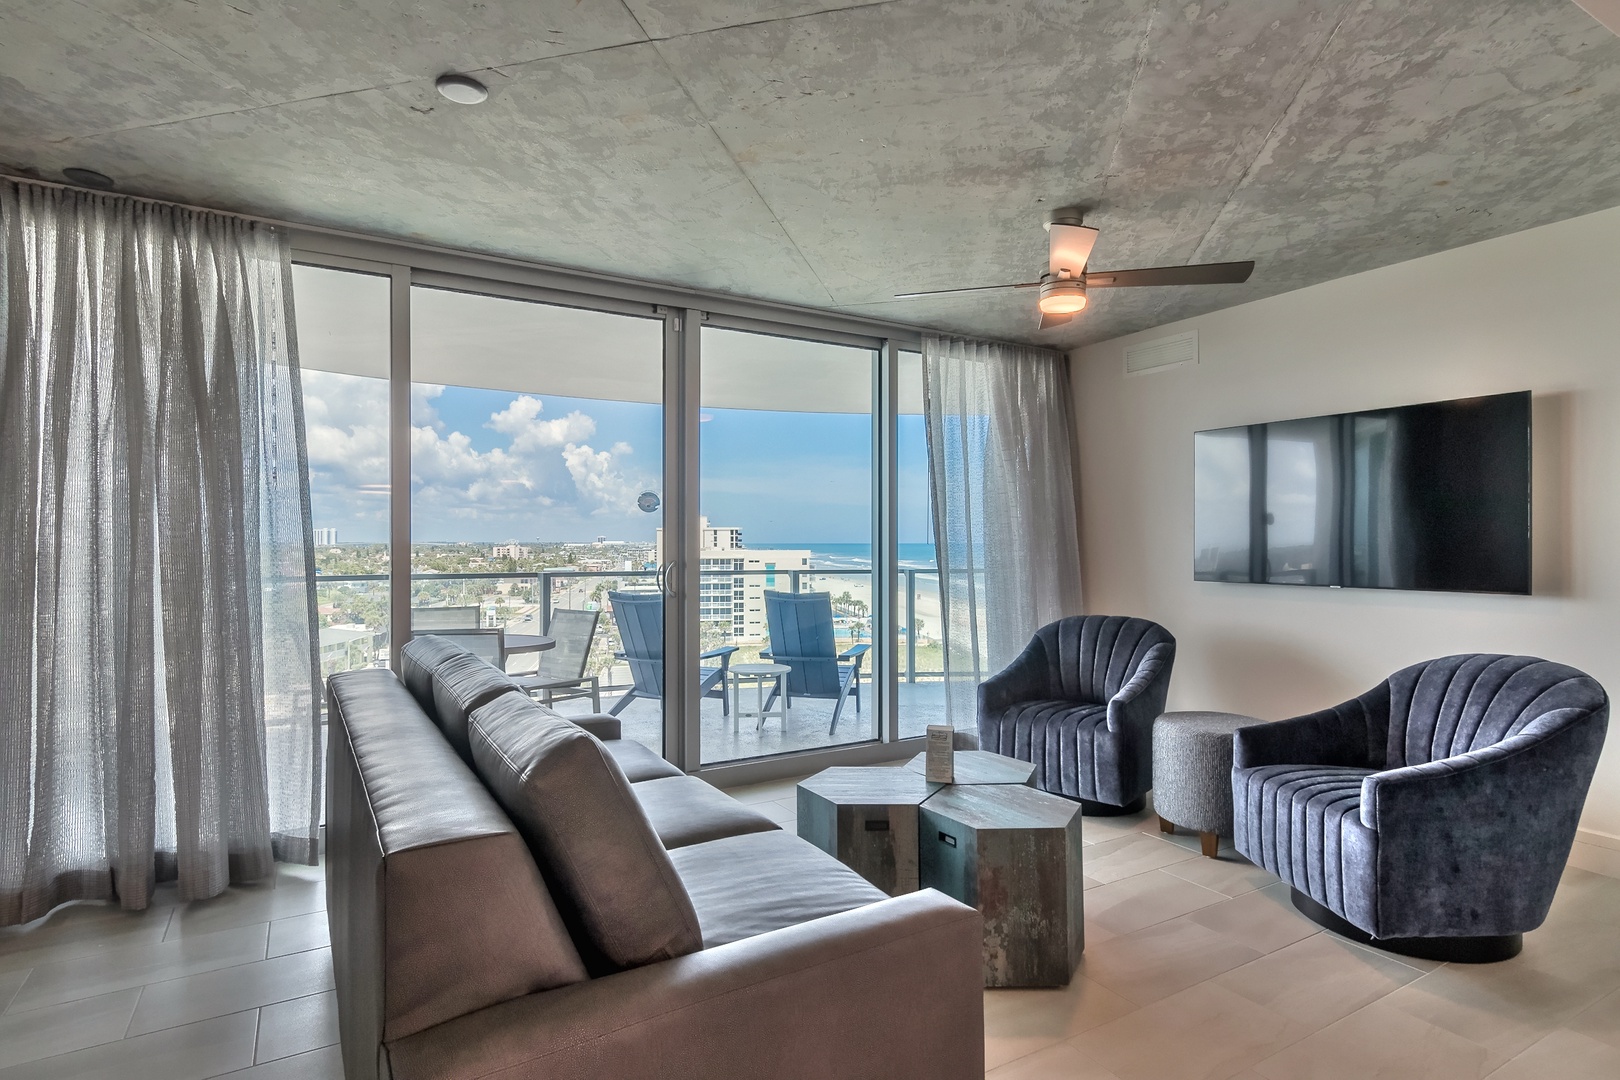 Embrace the Scenery: Stylish Living Room with Captivating Ocean and City Views